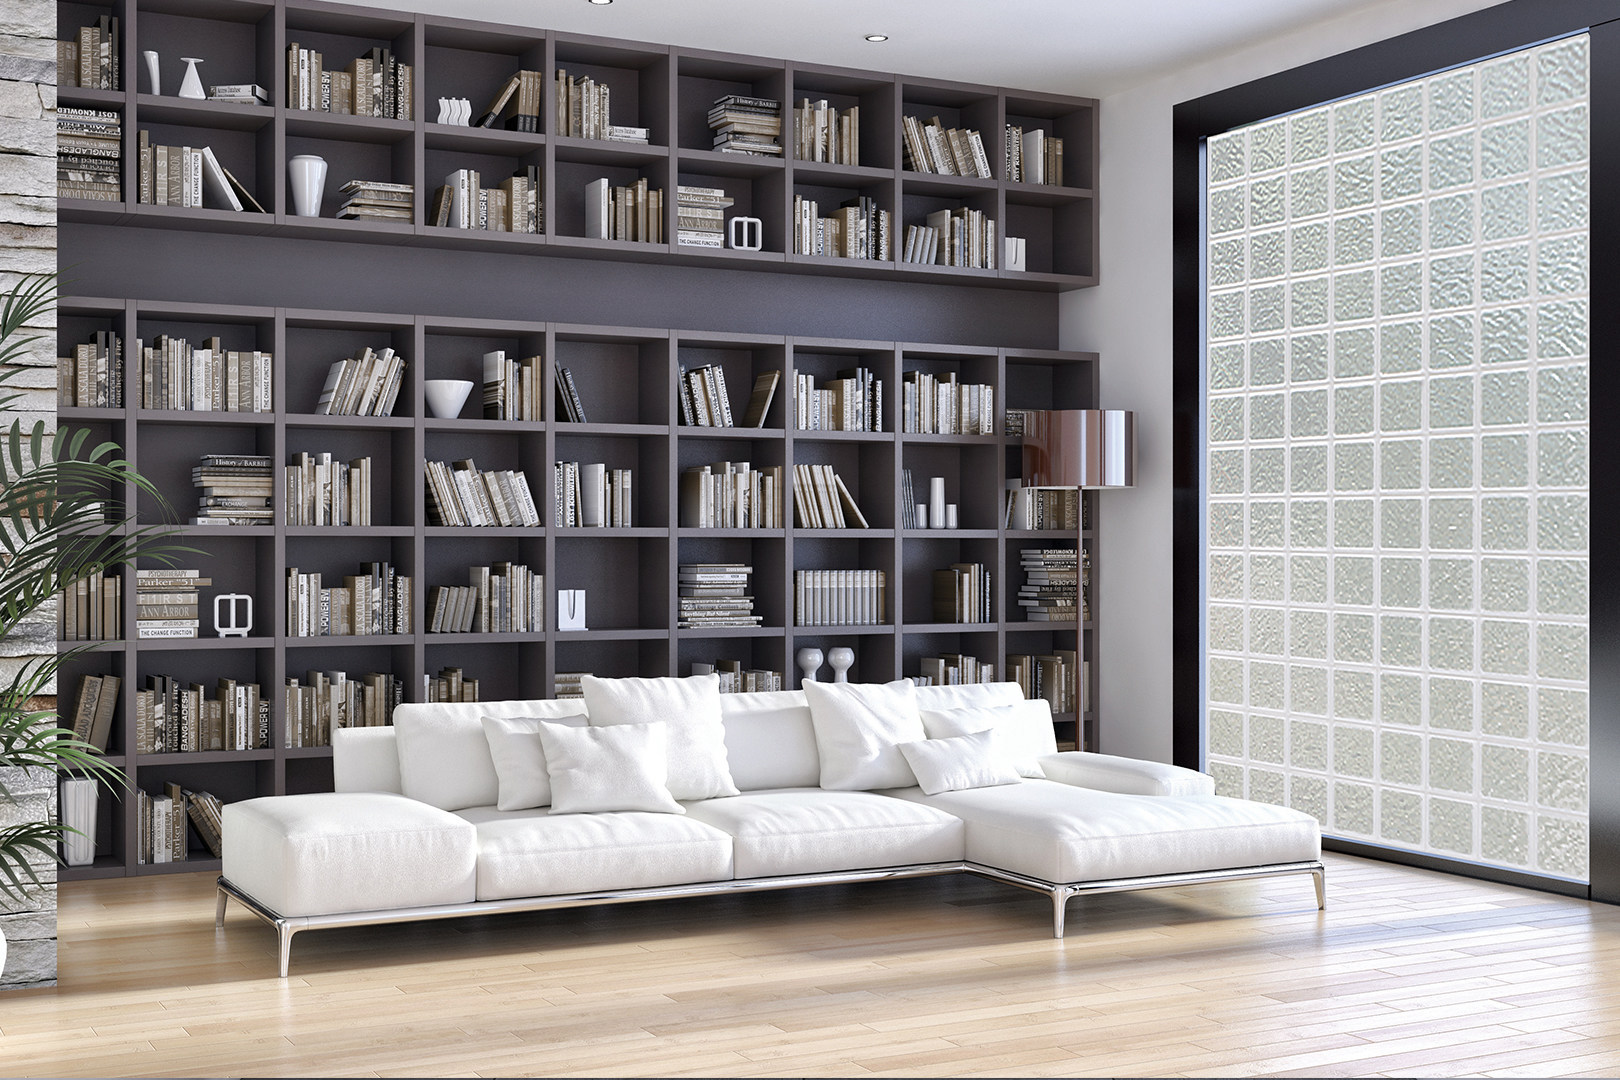 For 30 years, Hy-Lite has been manufacturing acrylic block windows, wall panels, radius wall surrounds, interior shutters and door inserts. The Florida-based company has made tens of millions of acrylic blocks during the past three decades.